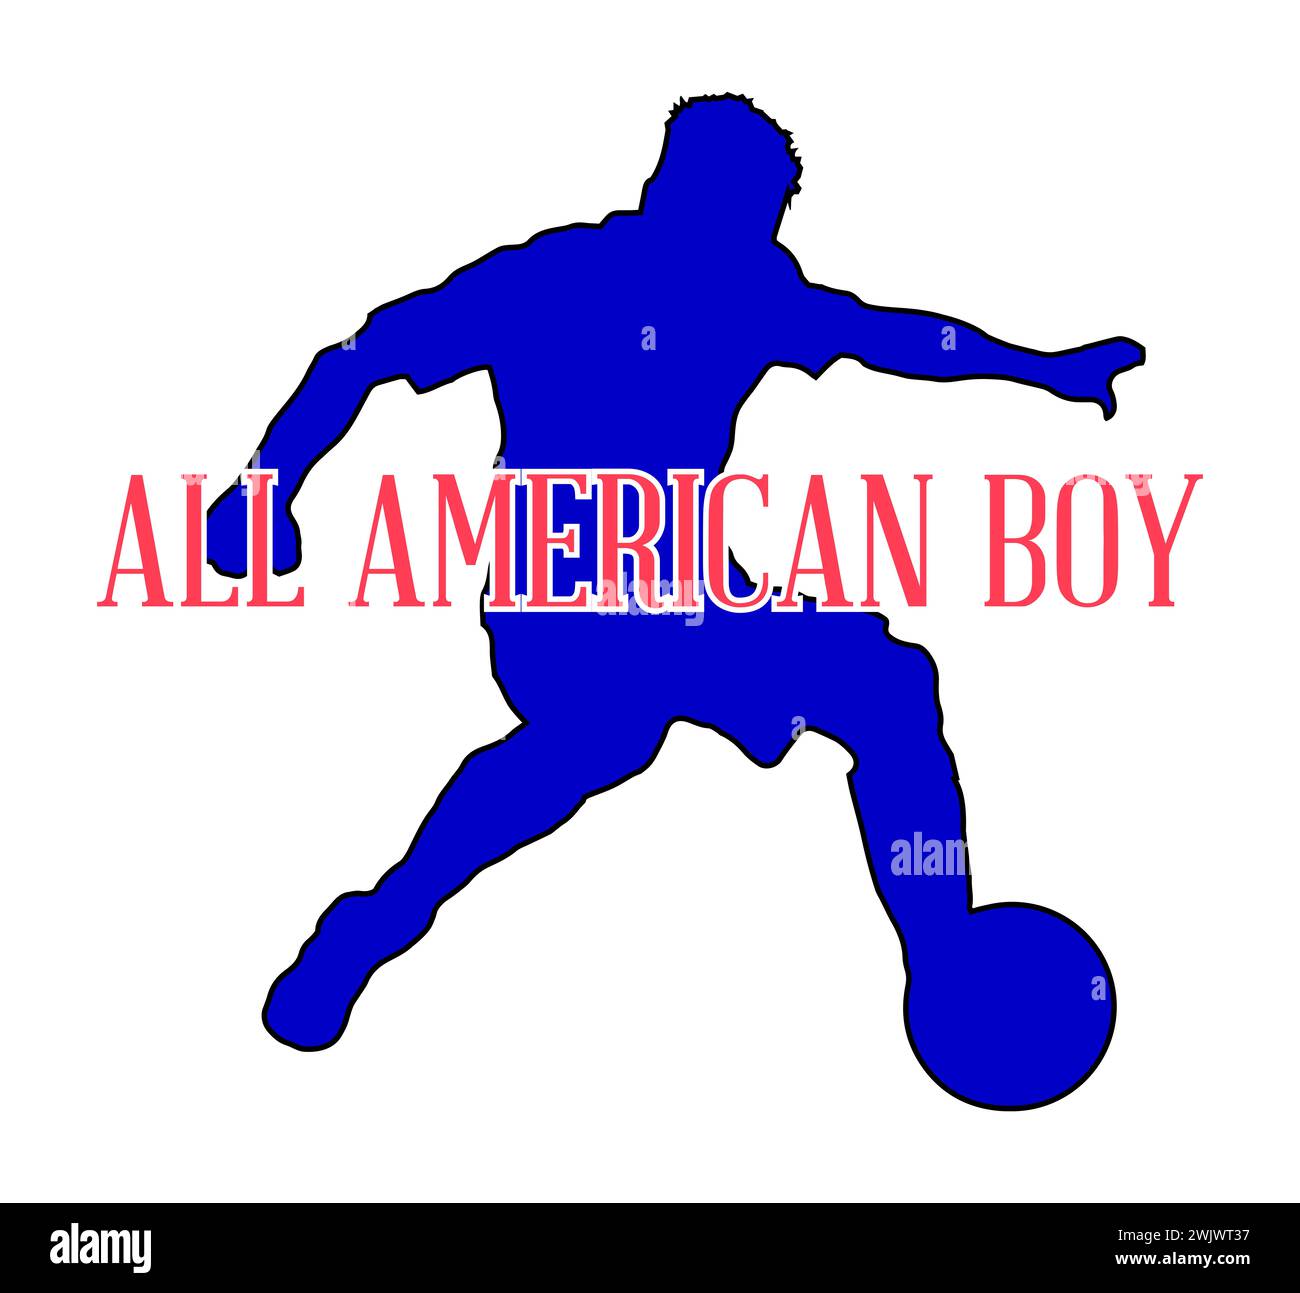 Silhouette of a USA footballer with national the tex All American Boy all on a white background Stock Photo